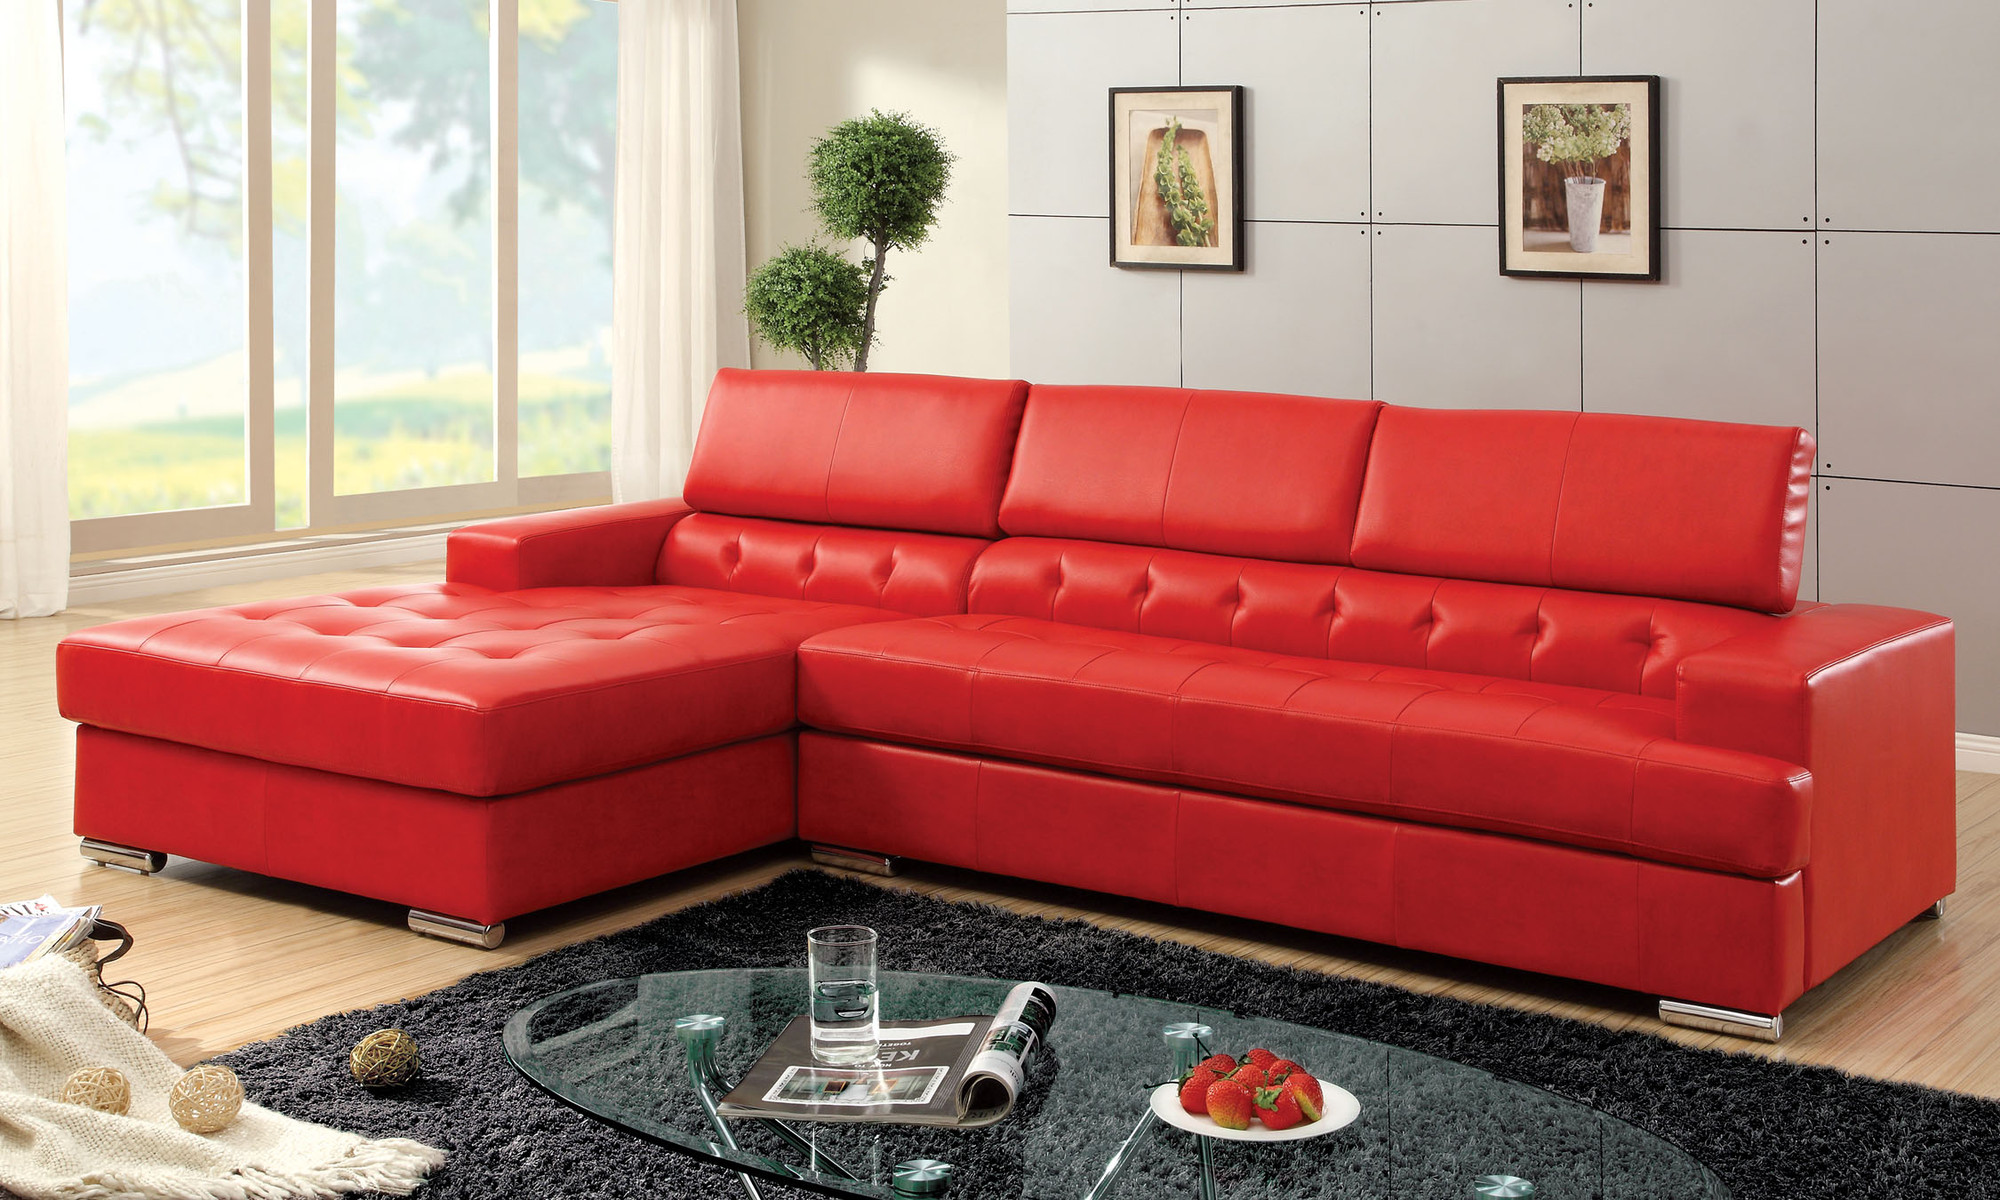 furniture-insteresting-red-tufted-leather-sofa